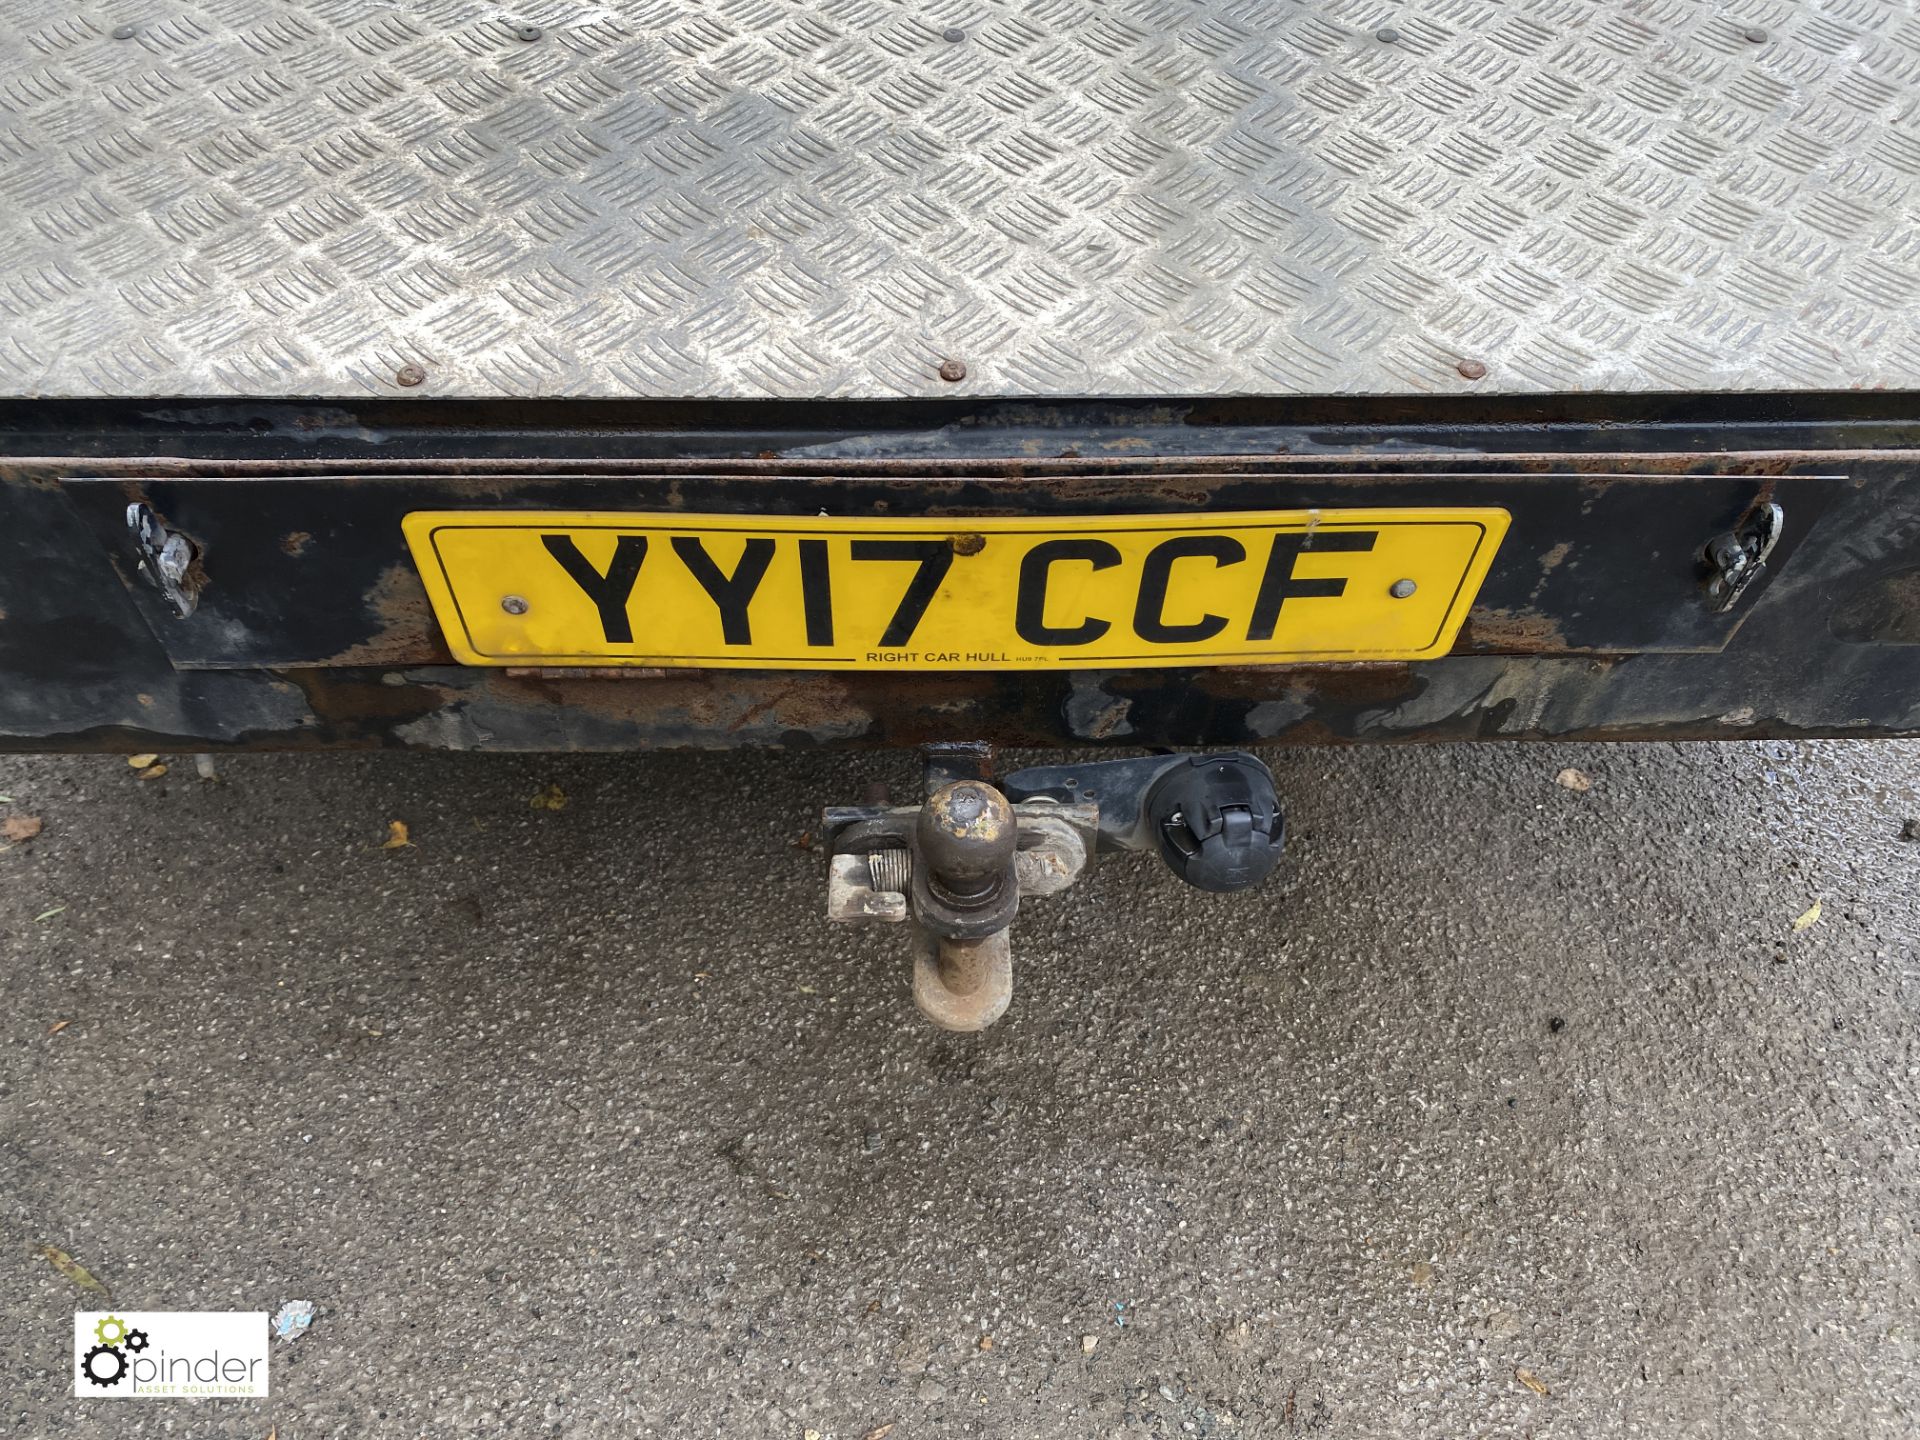 Renault Master FWD LL35 dci 130 Recovery Truck, registration YY17 CCF, date of registration 31 March - Image 11 of 20